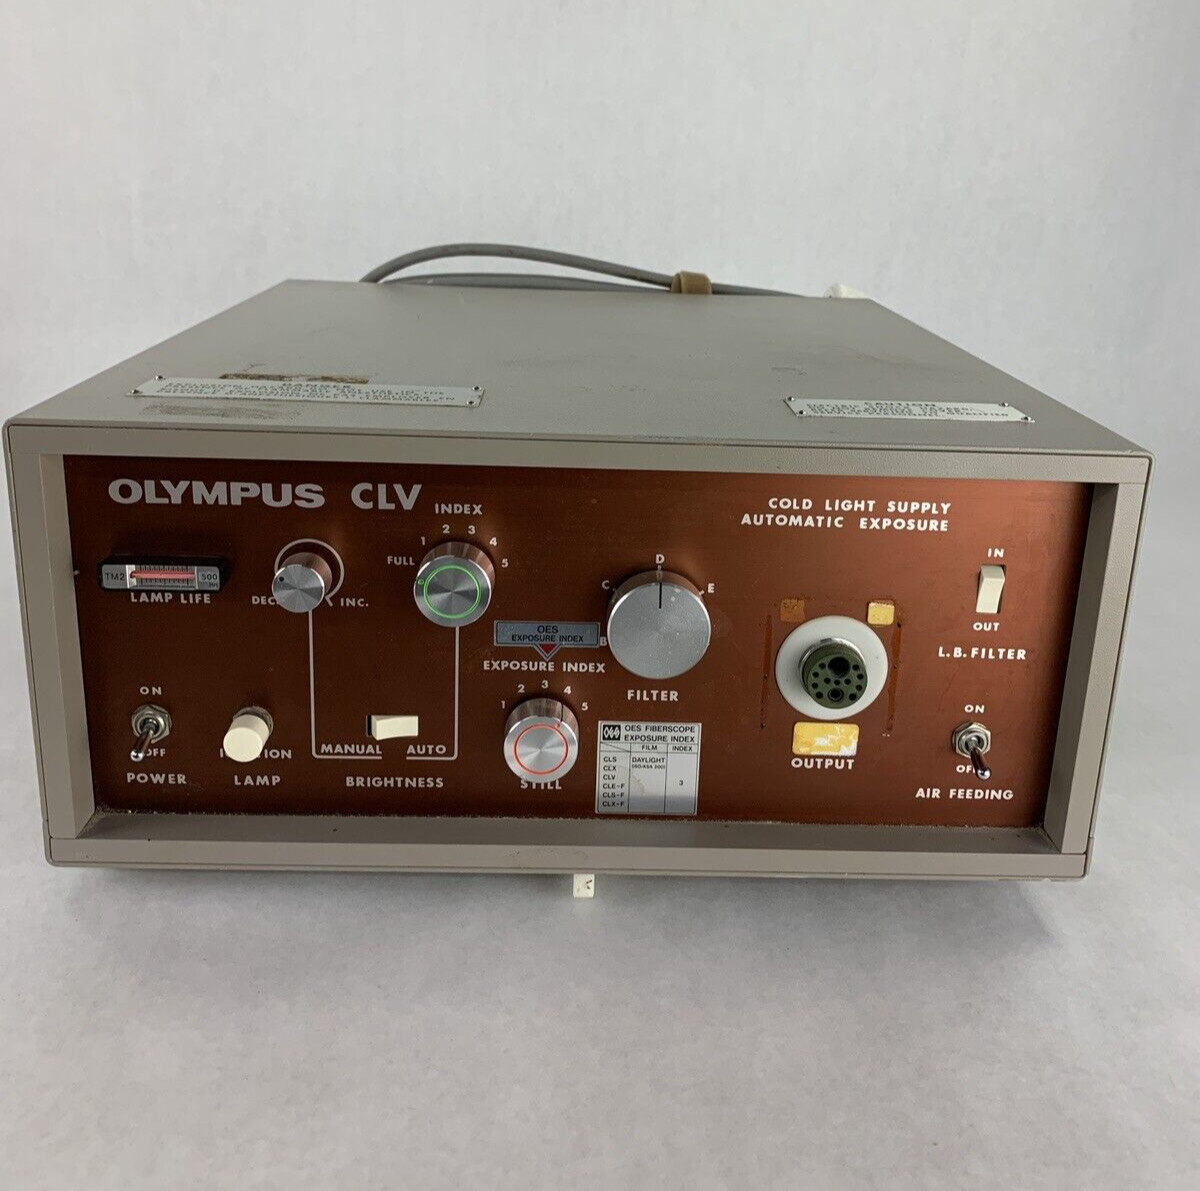 Olympus CLV Cold Light Source Supply 6A 120V 60Hz Power Tested